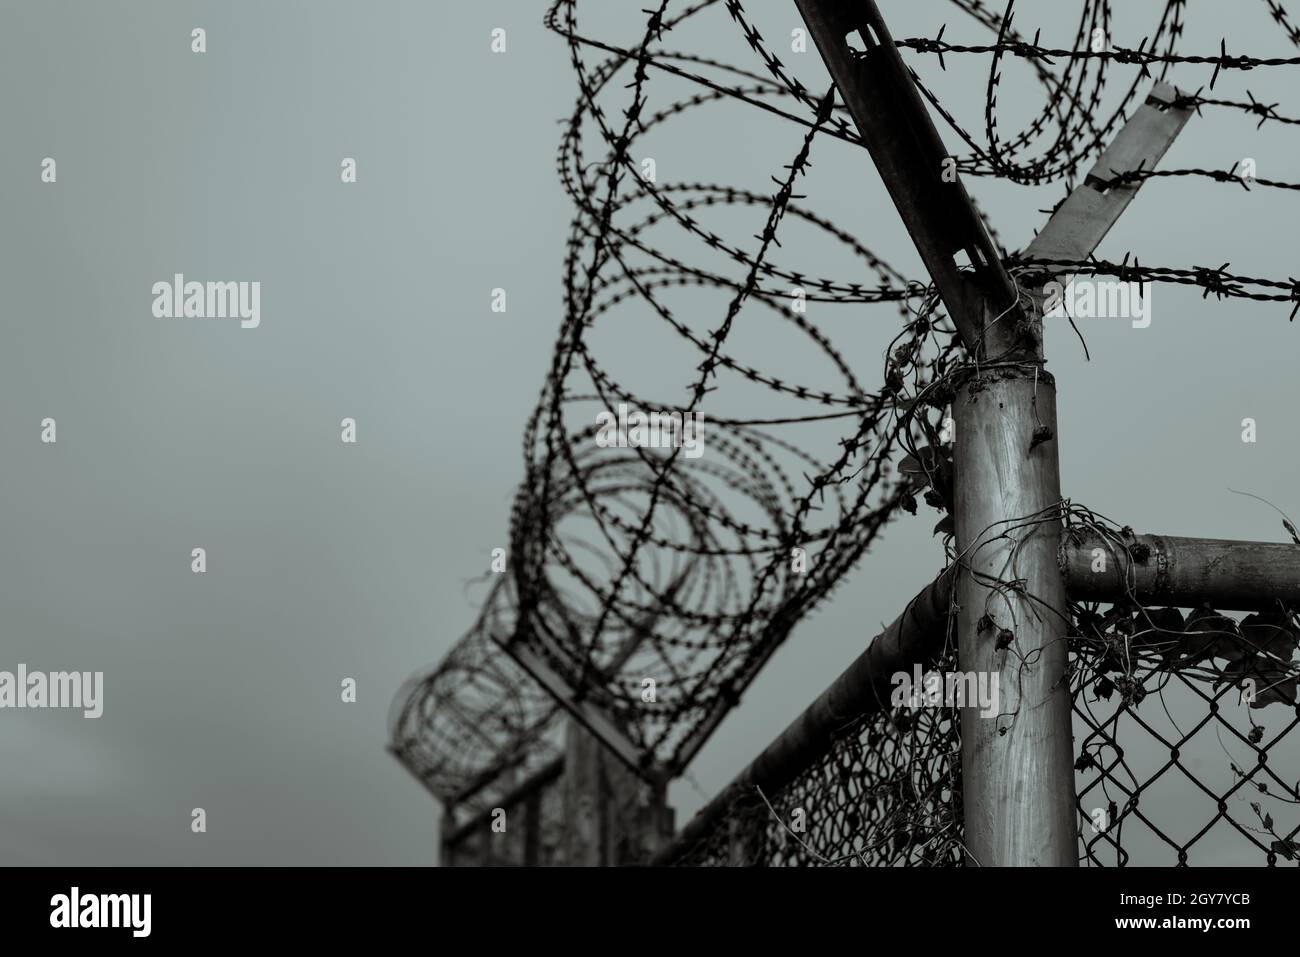 Prison security fence. Barbed wire security fence. Razor wire jail fence. Barrier border. Boundary security wall. Prison for arrest criminals or terro Stock Photo